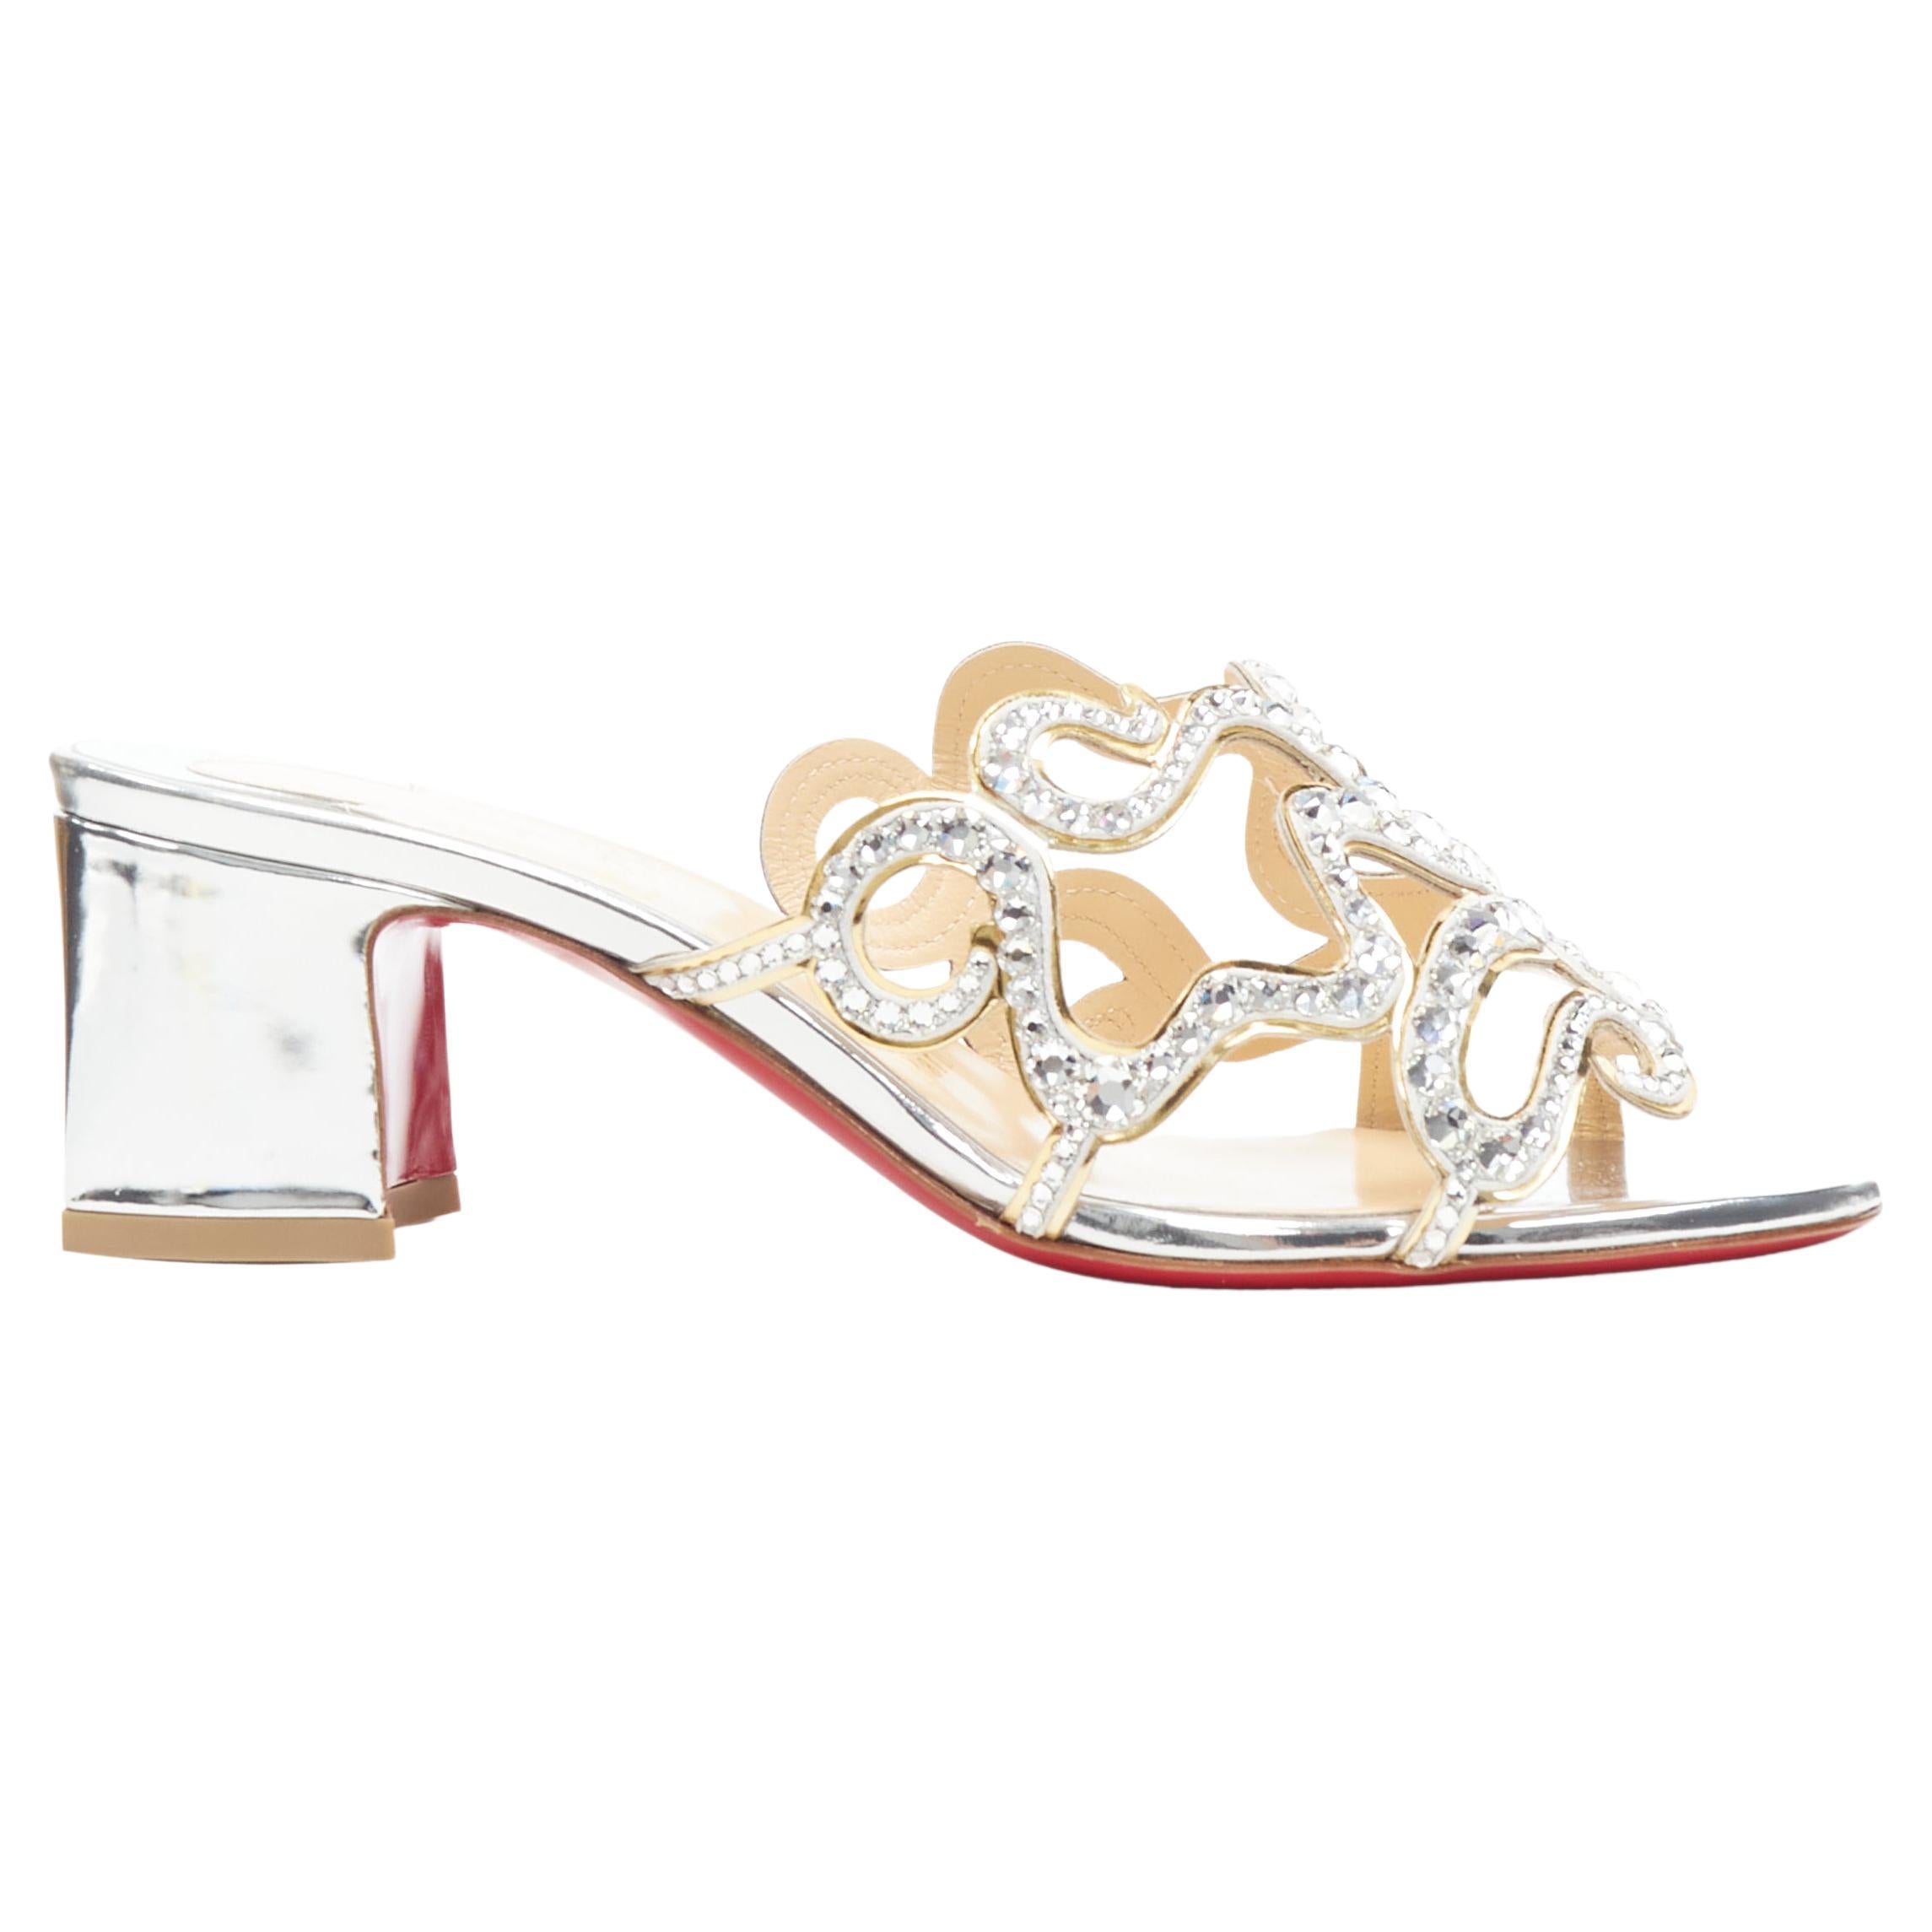 Vintage Christian Louboutin: Shoes, Bags & More - 1,899 For Sale 